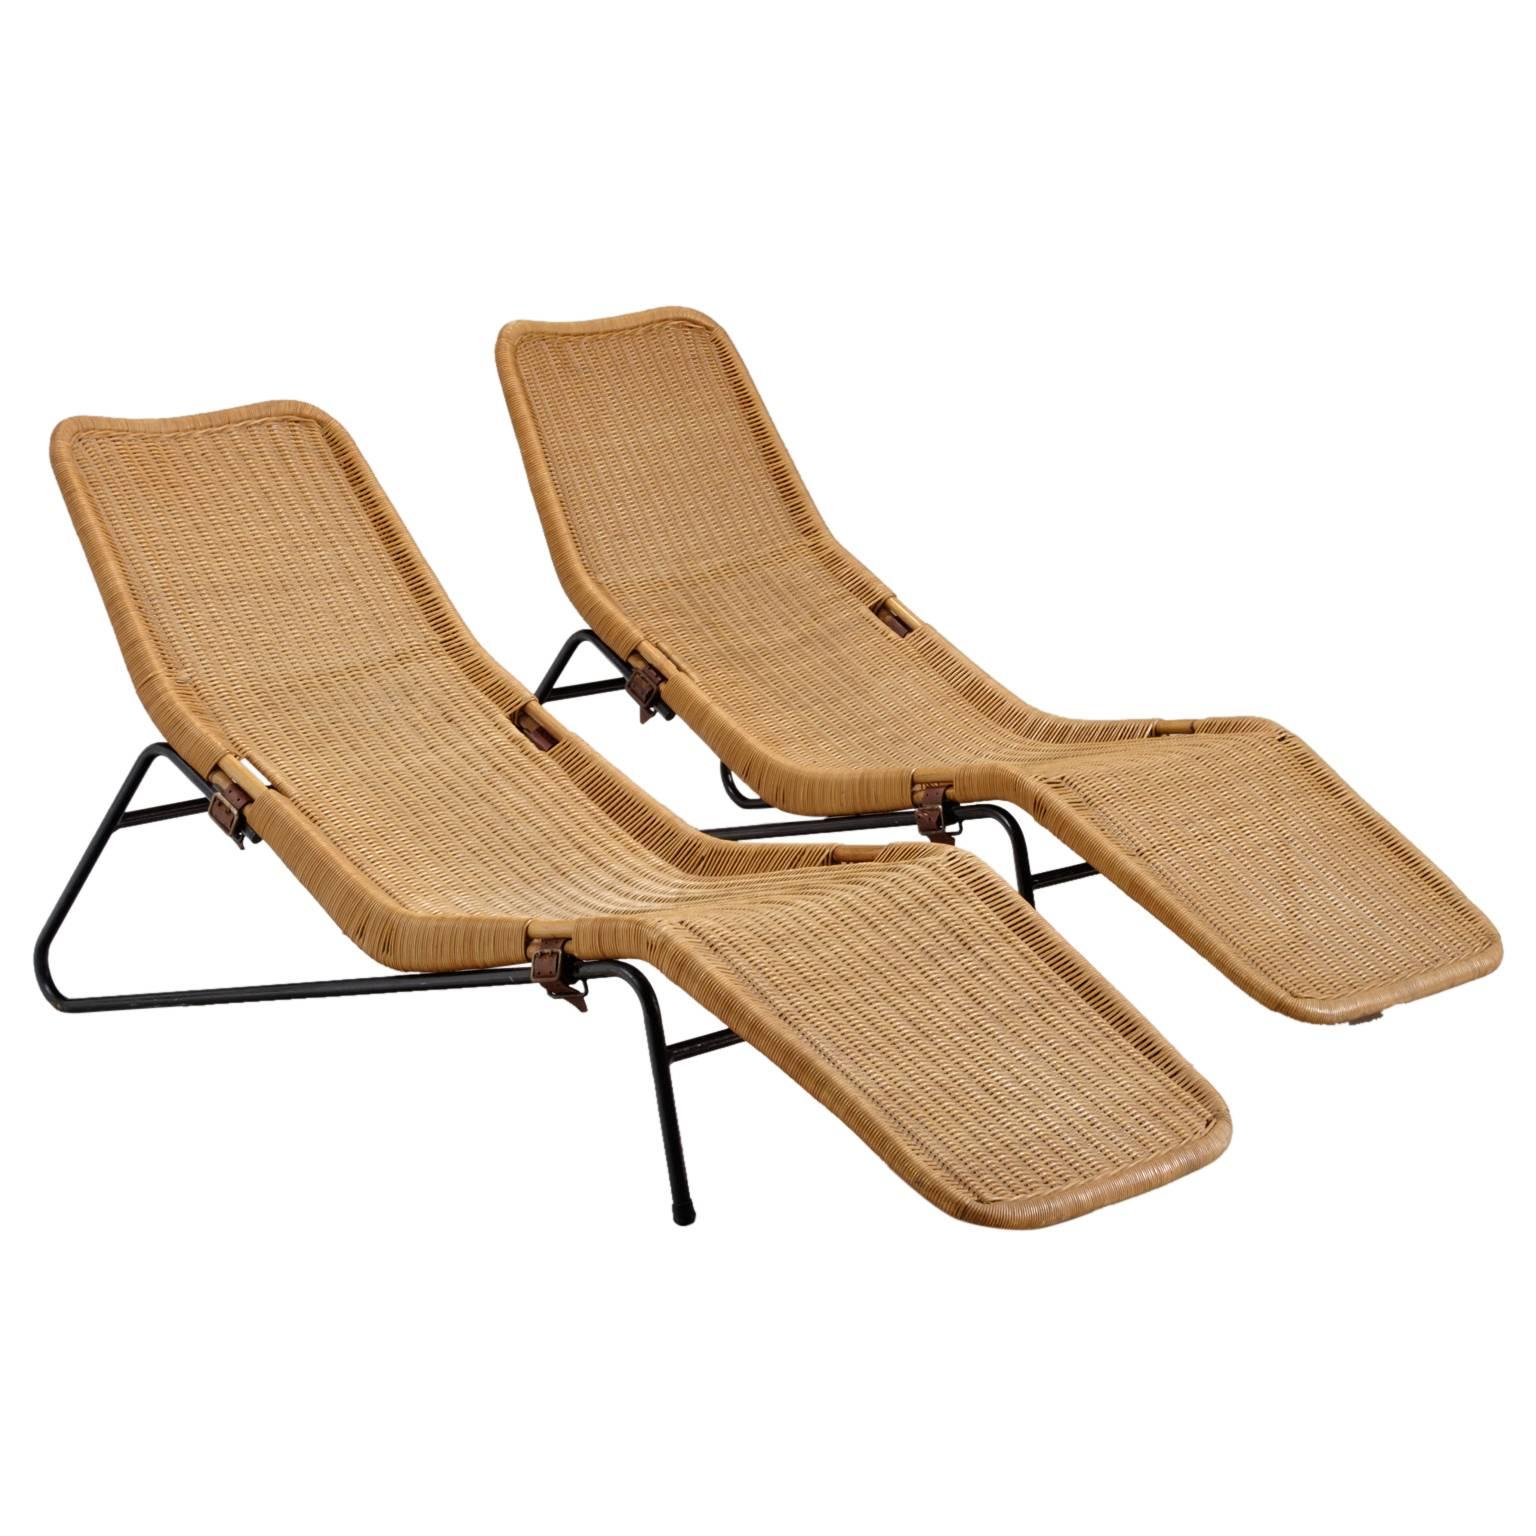 Set of Two Chaise Lounges in Cane